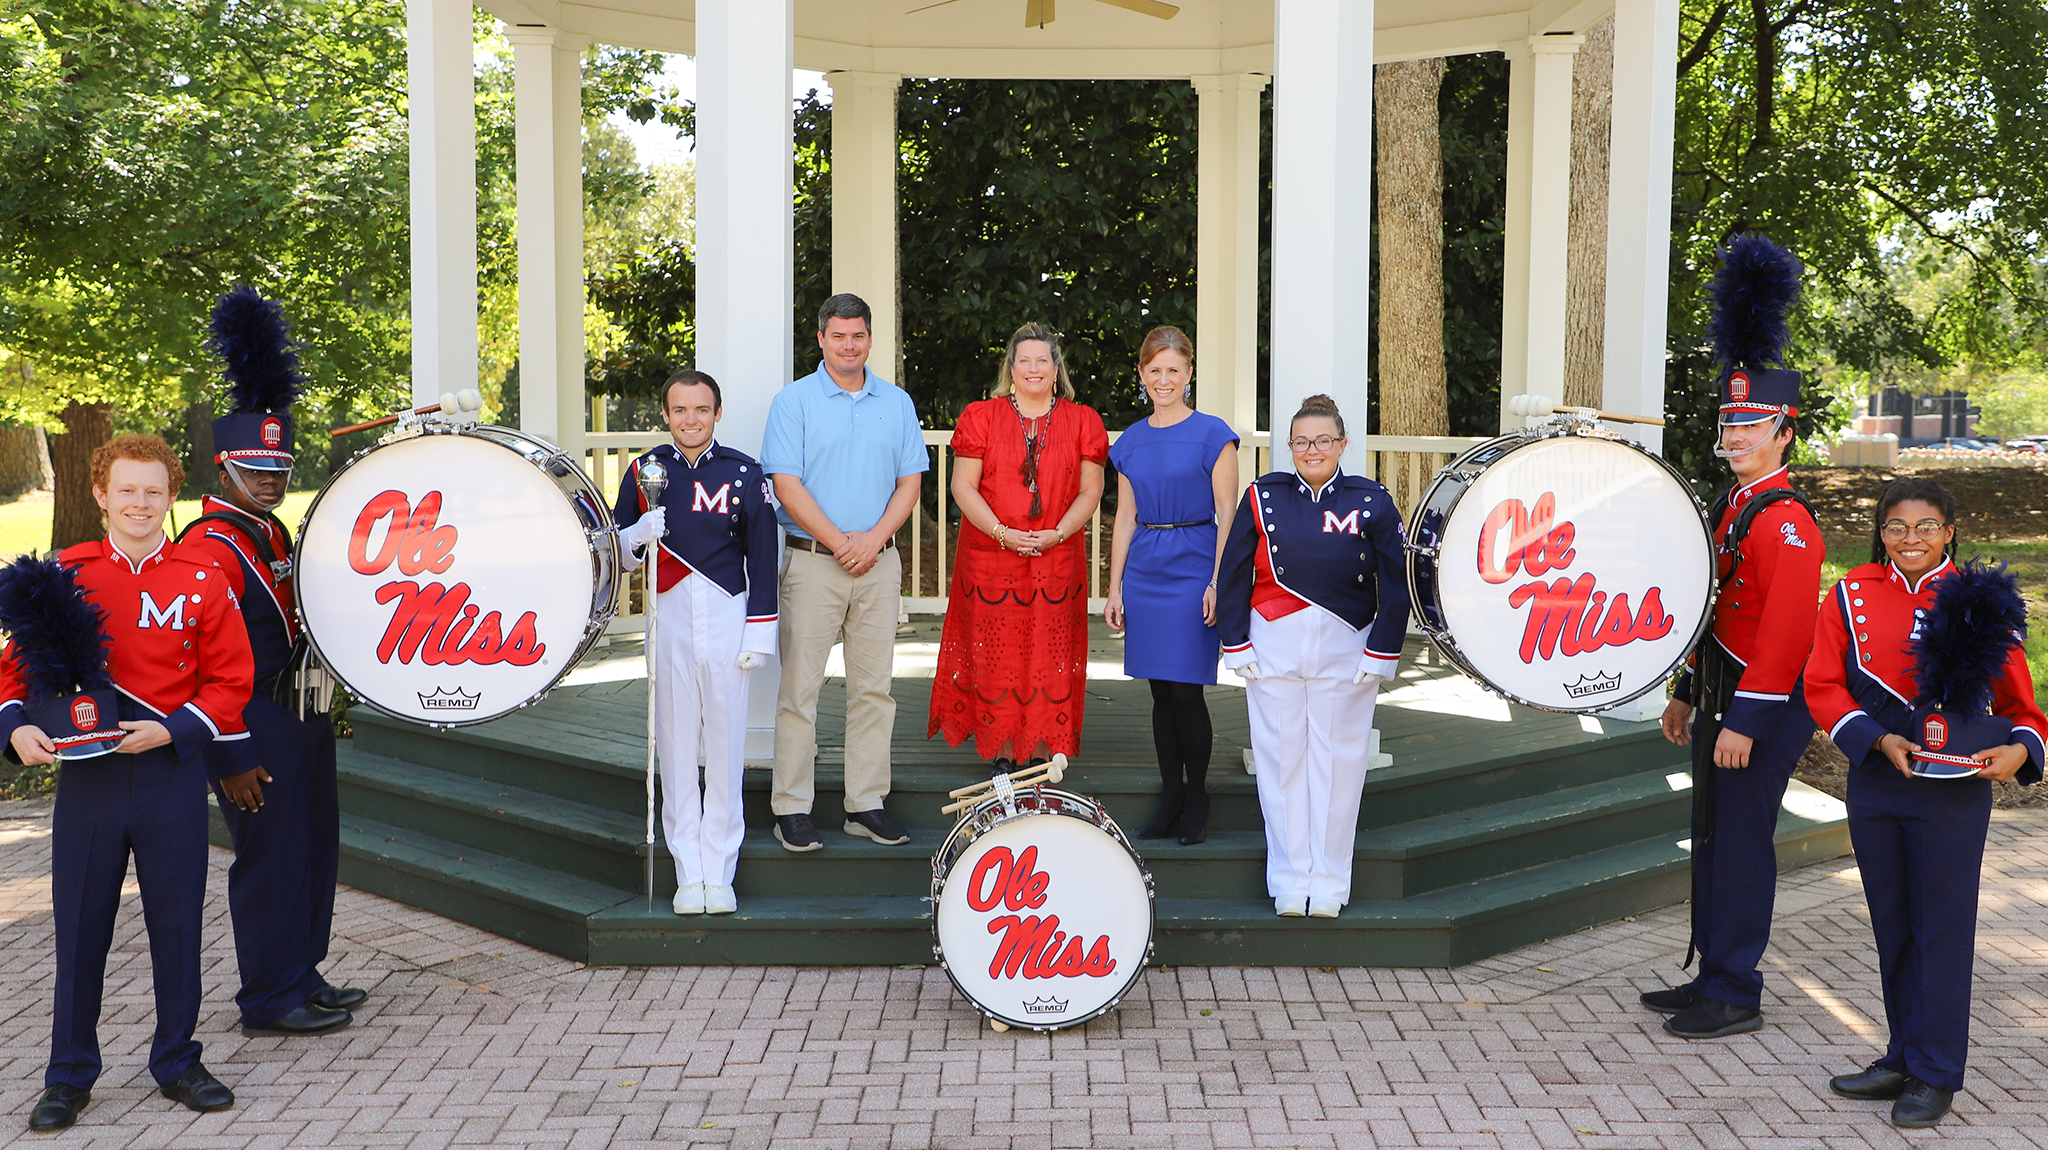 Helen Overstreet poses with members of the band 